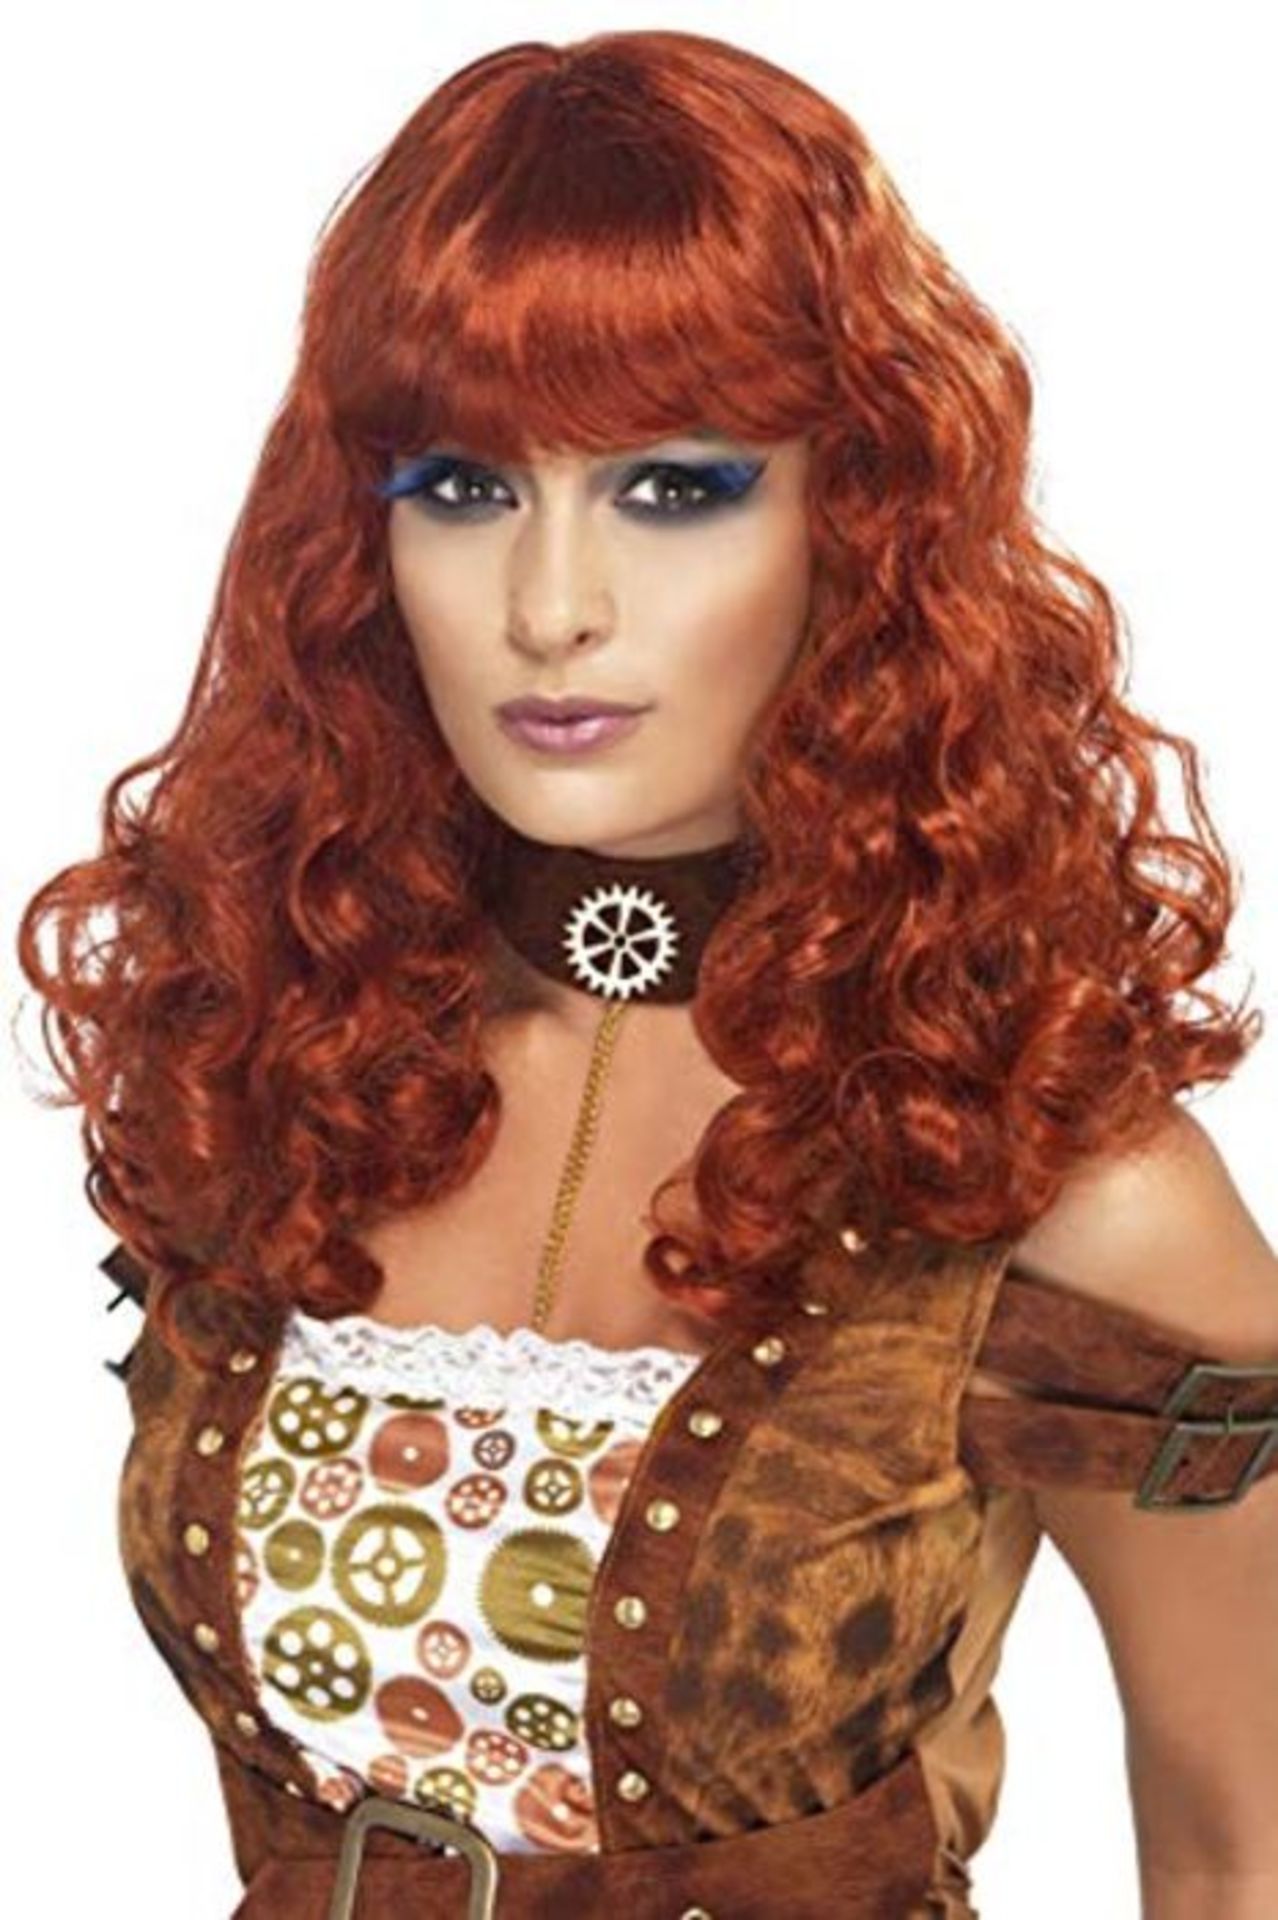 Smiffys Women's Long and Curly Auburn Wig with Bangs, One Size, Steampunk Wig, 5020570